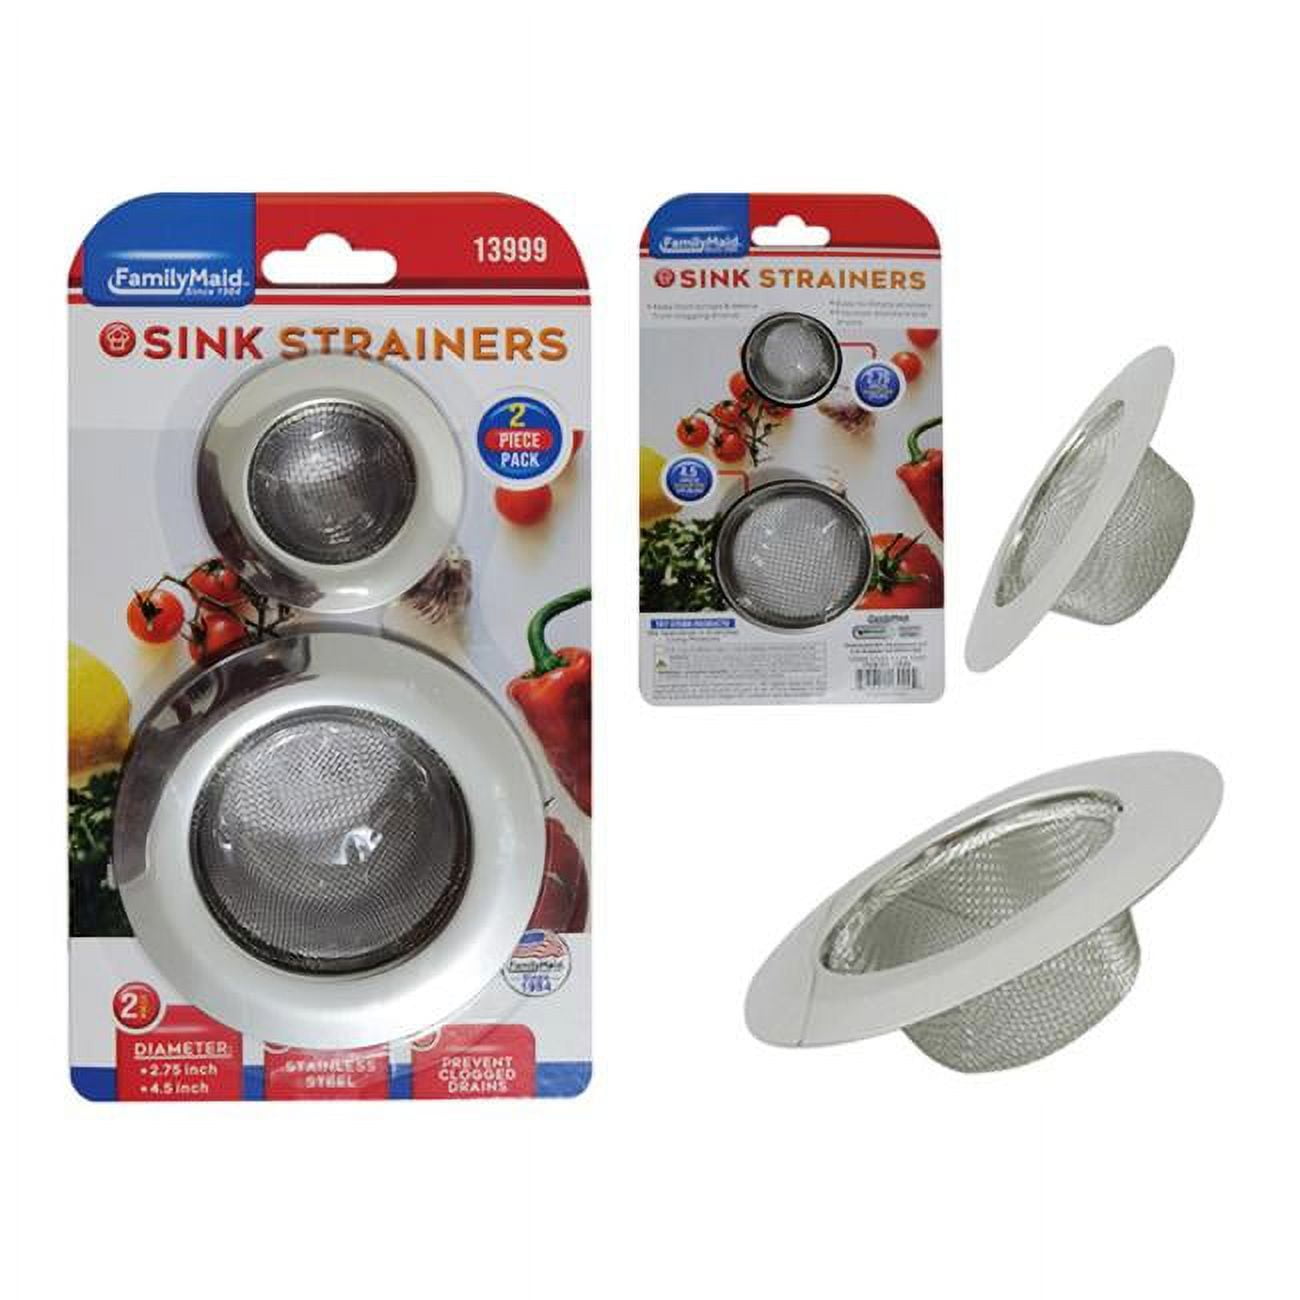 Family Maid FamilyMaid 13999 2.75 - 4.5 in. Sink Strainers - 2 Piece